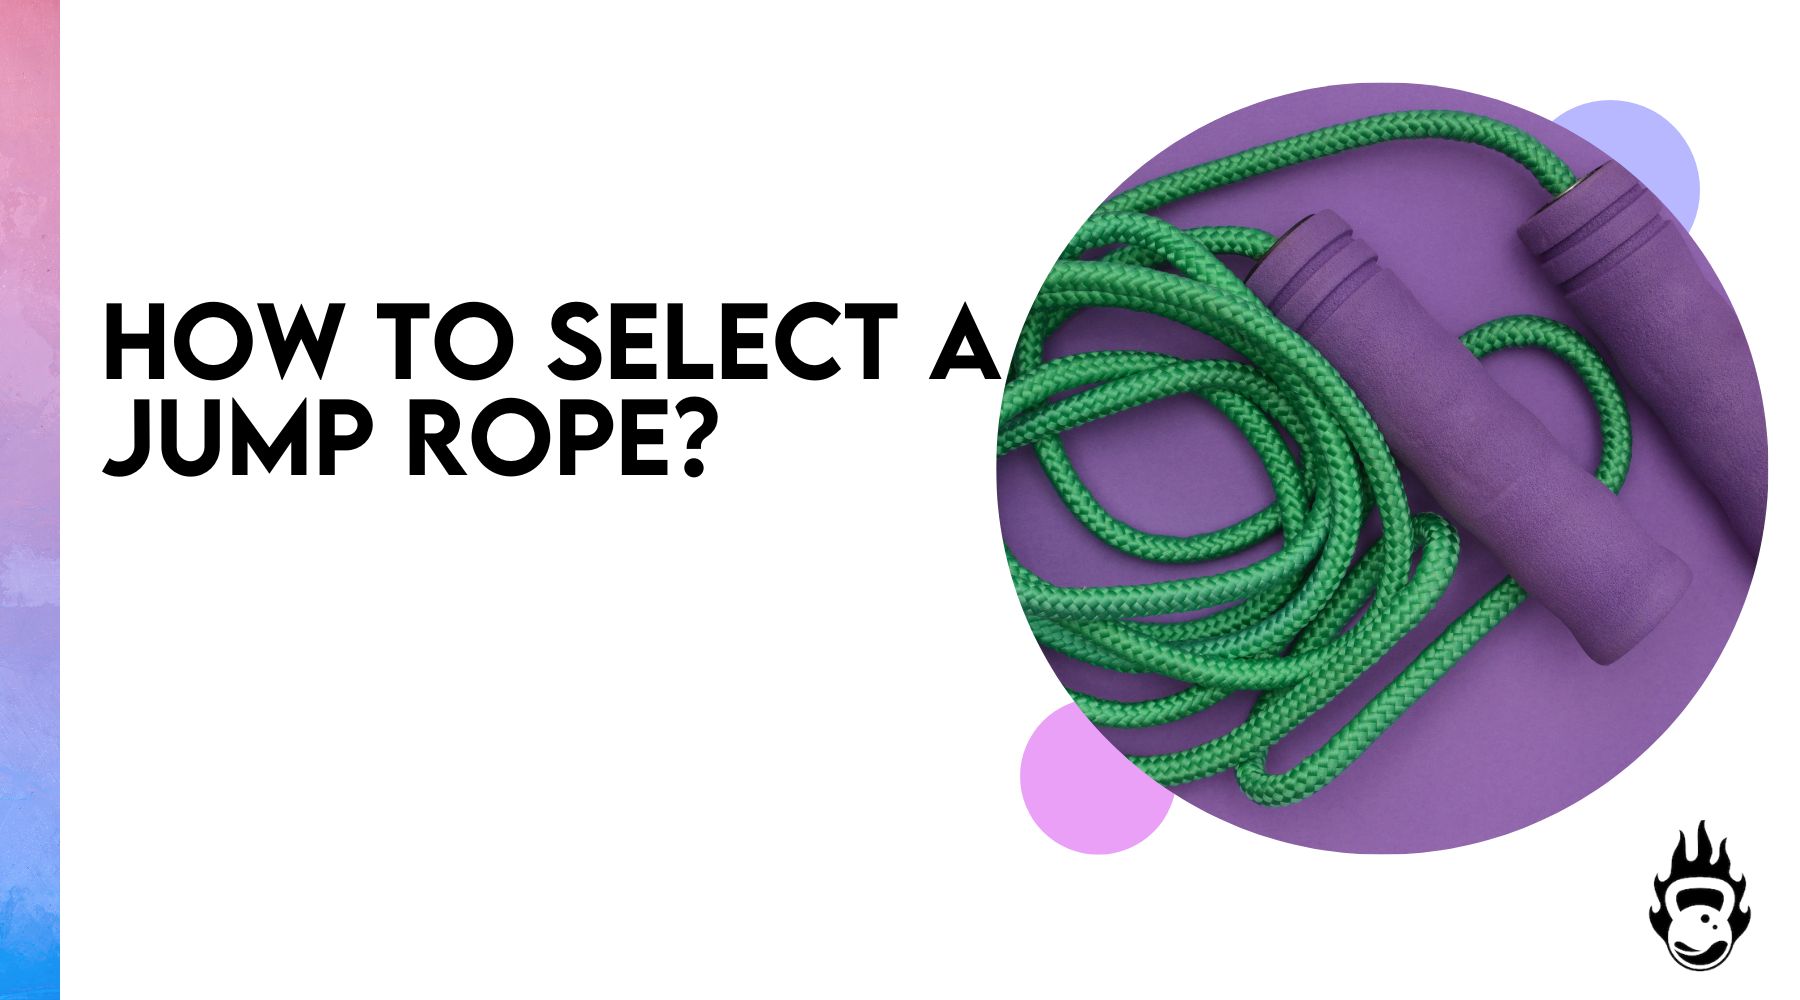 How to select a jump rope